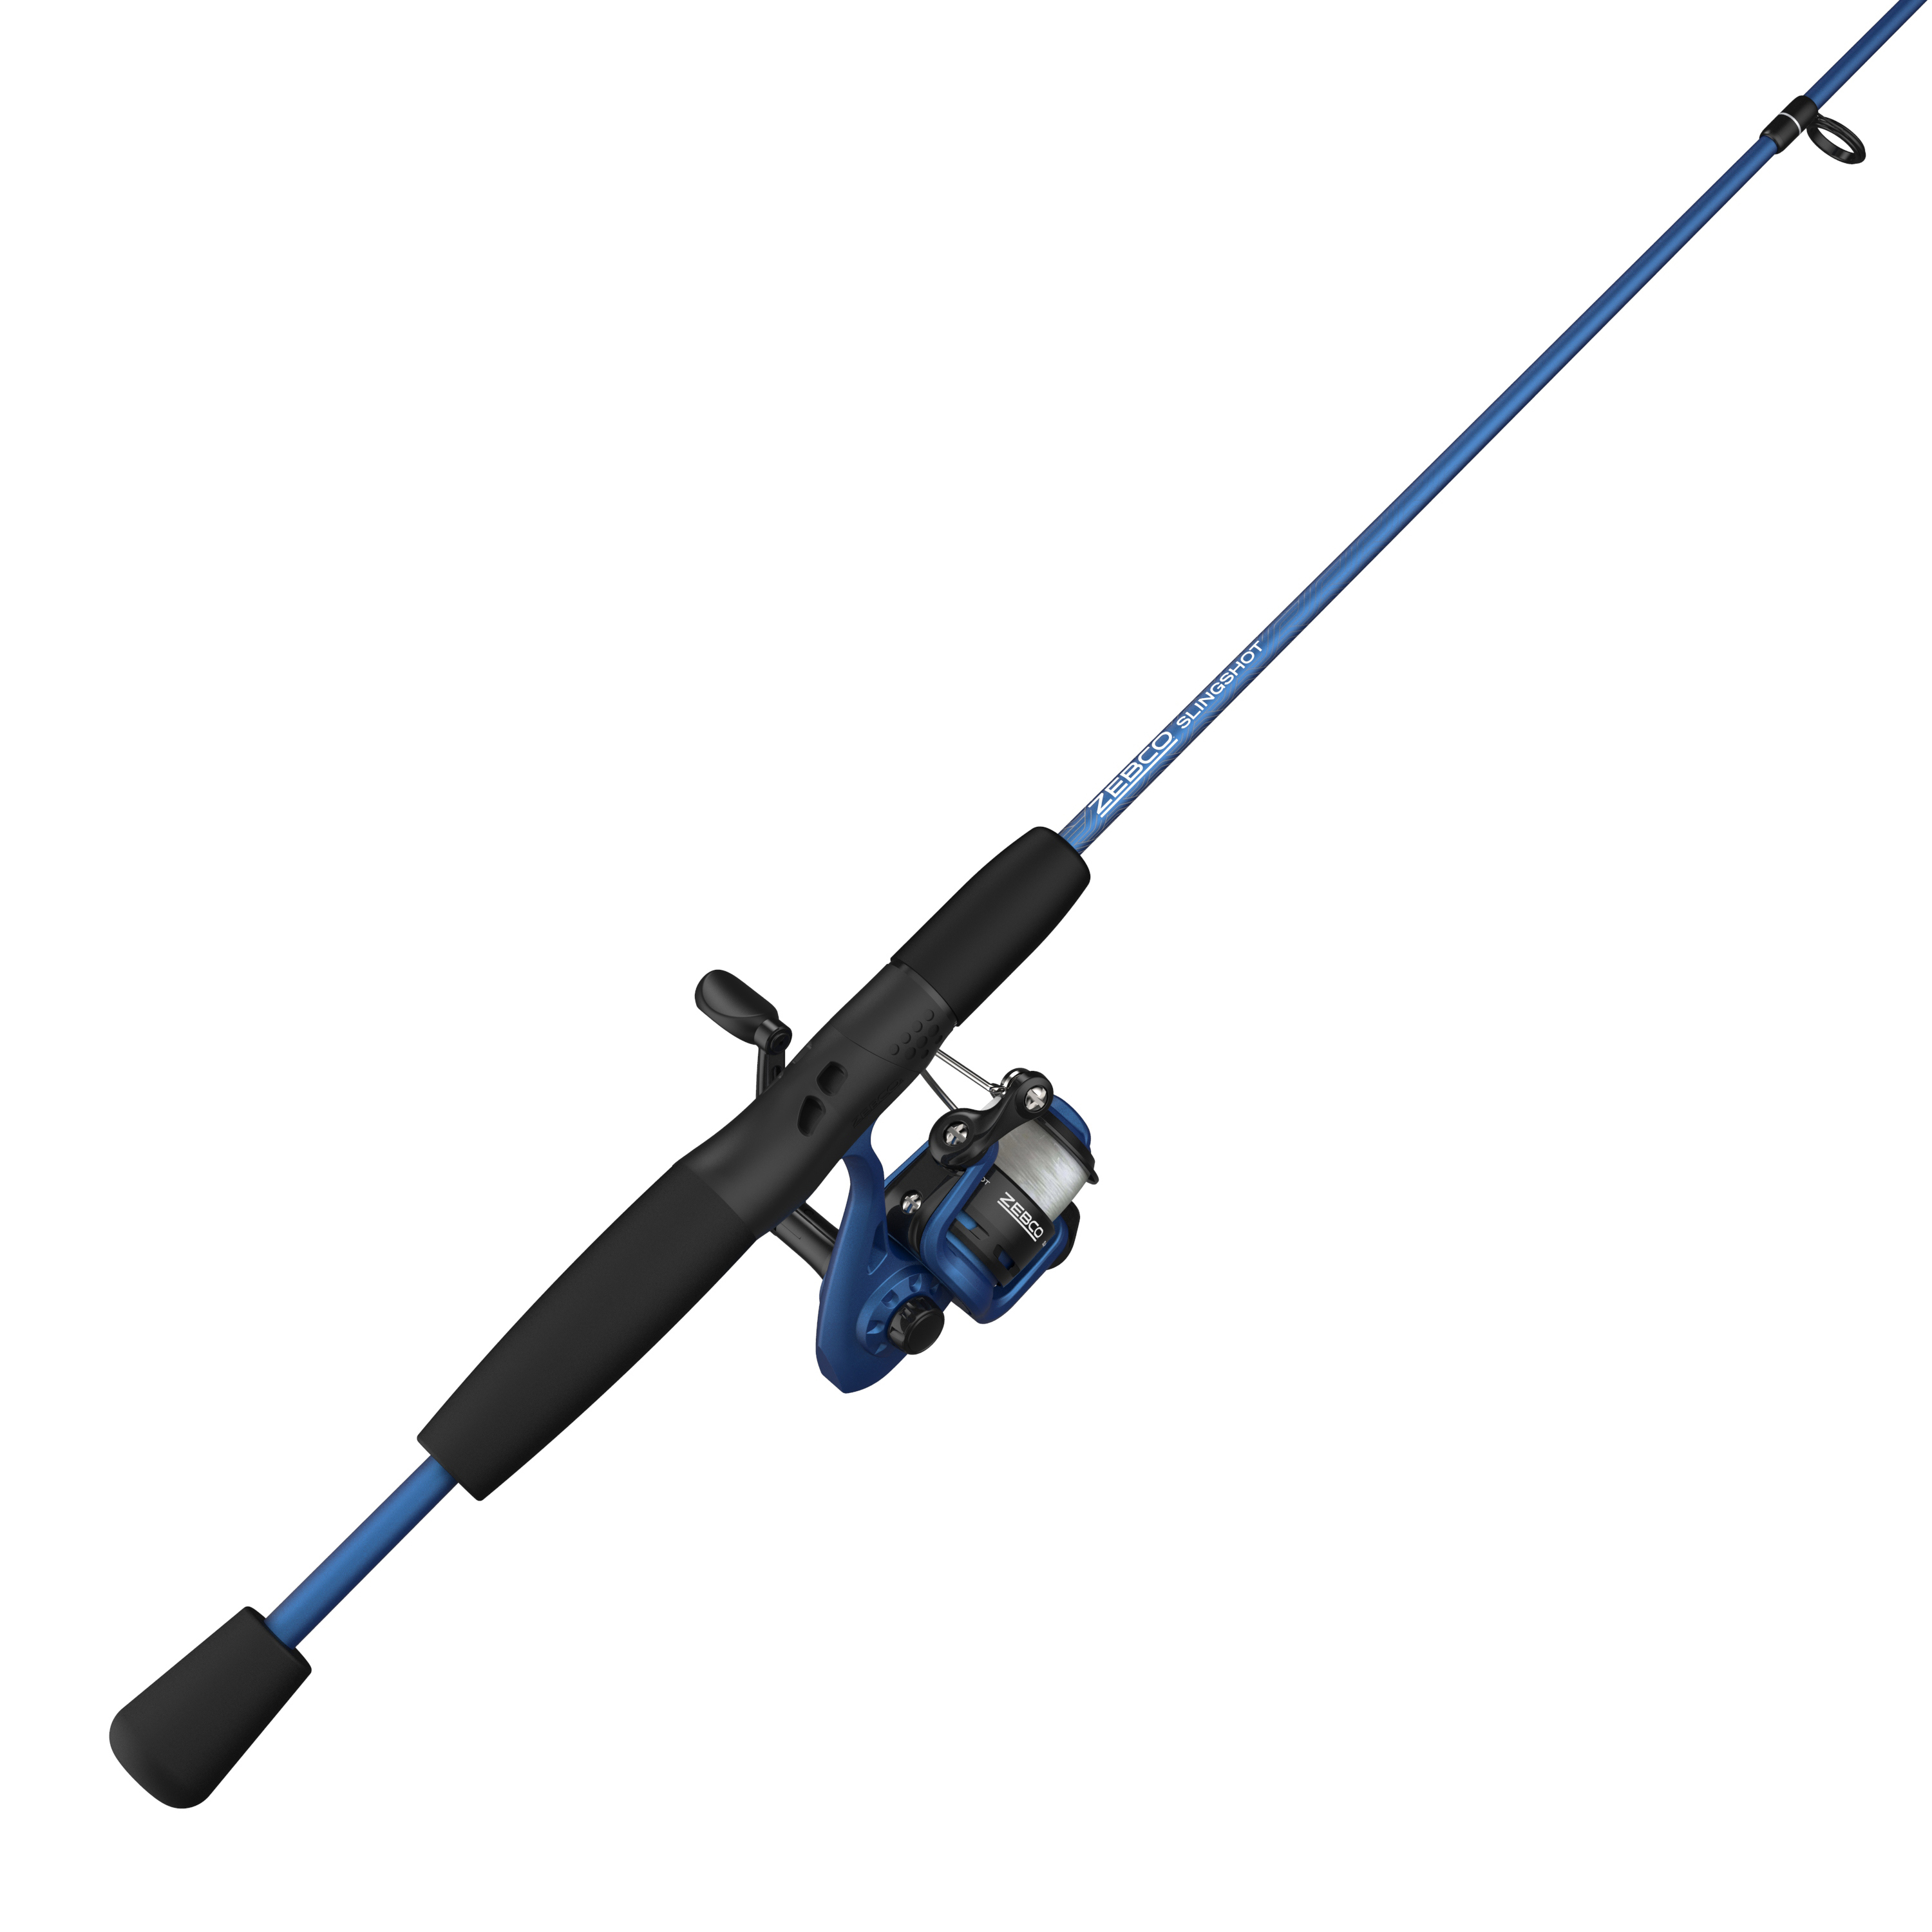 .com : Zebco 33 Spincast Reel and Fishing Rod Combo, 6-Foot